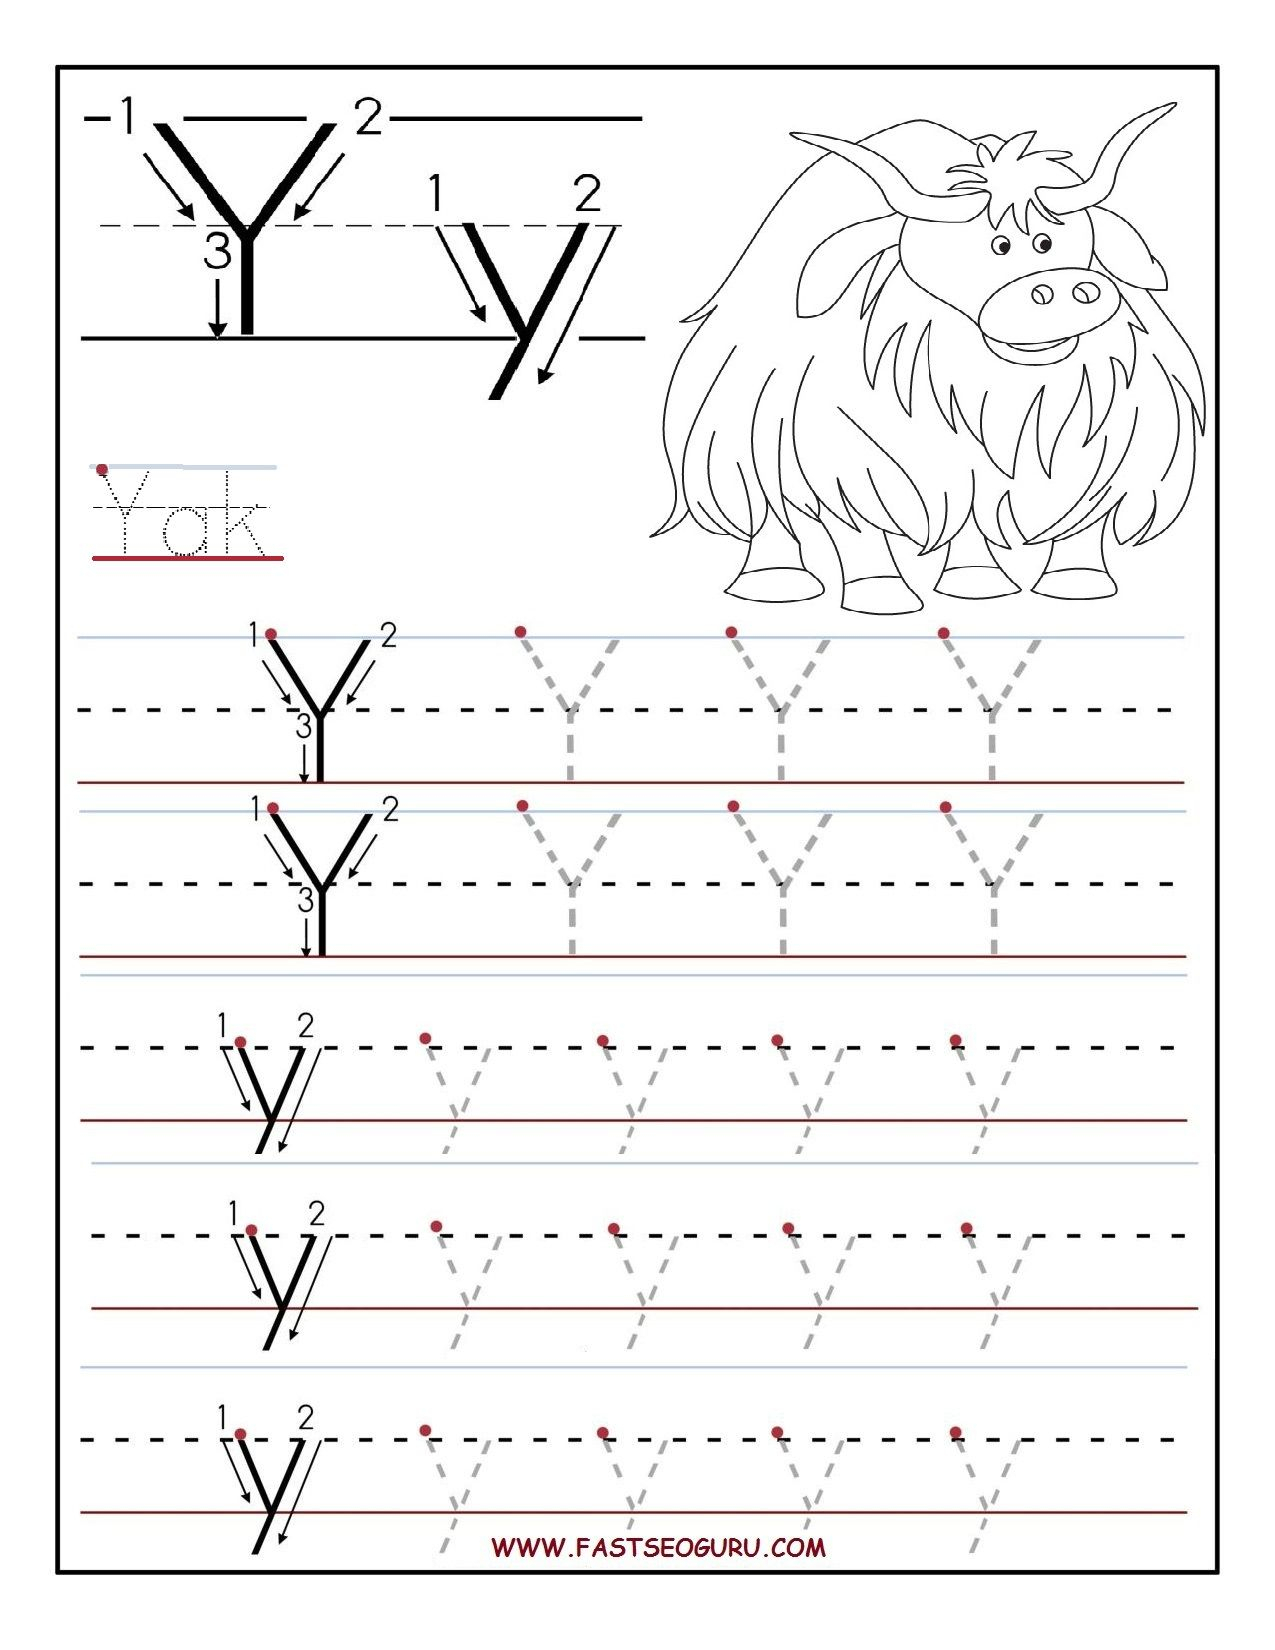 Printable Letter Y Tracing Worksheets For Preschool | Letter pertaining to Trace Letter Y Worksheets